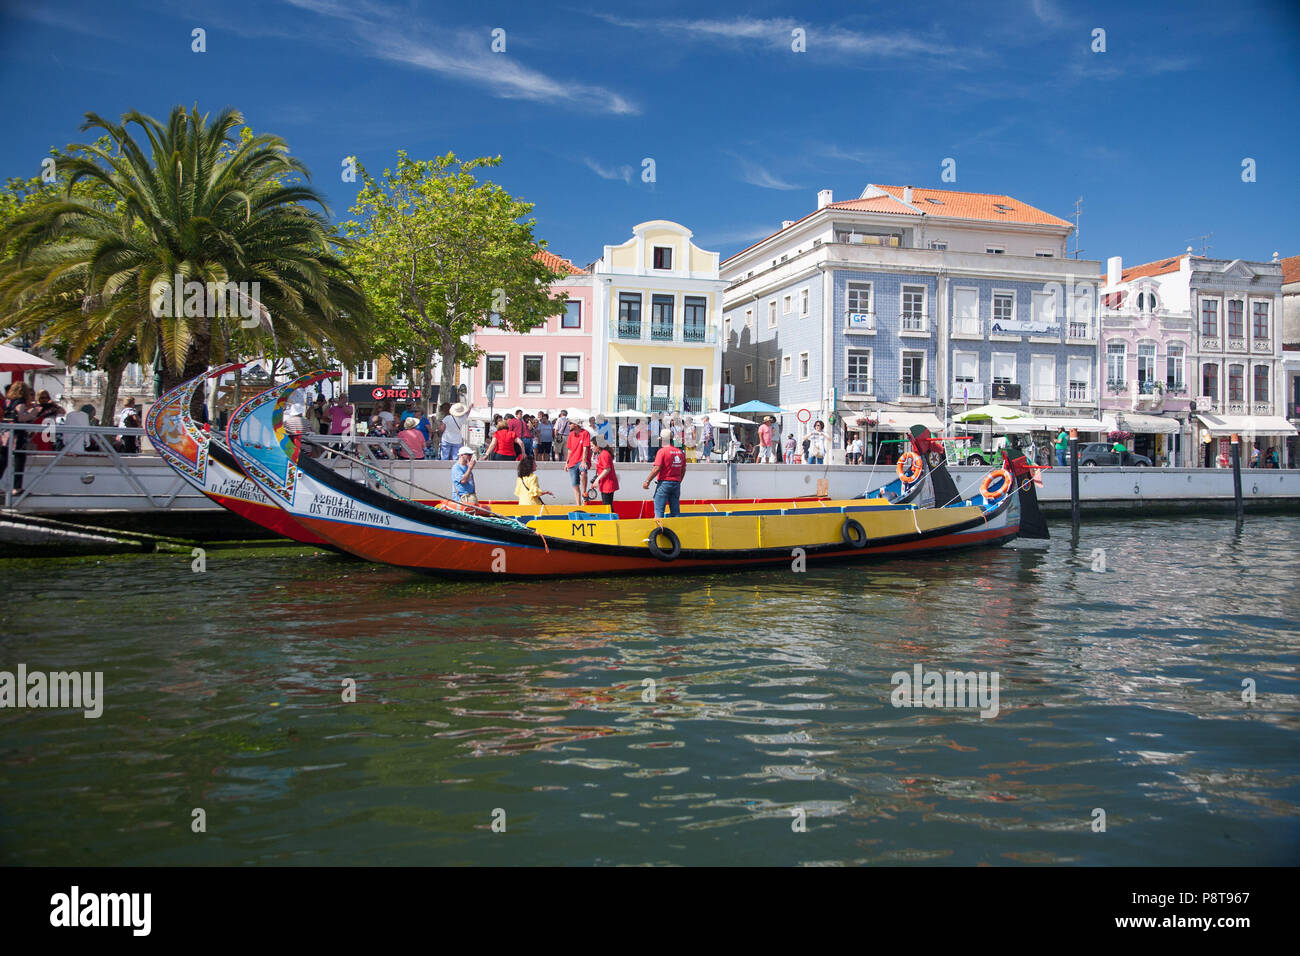 A Moliceiro (a boat formerly used for collecting seaweed) taking aboard visitors to see the canals of Aveiro, Portugal Stock Photo